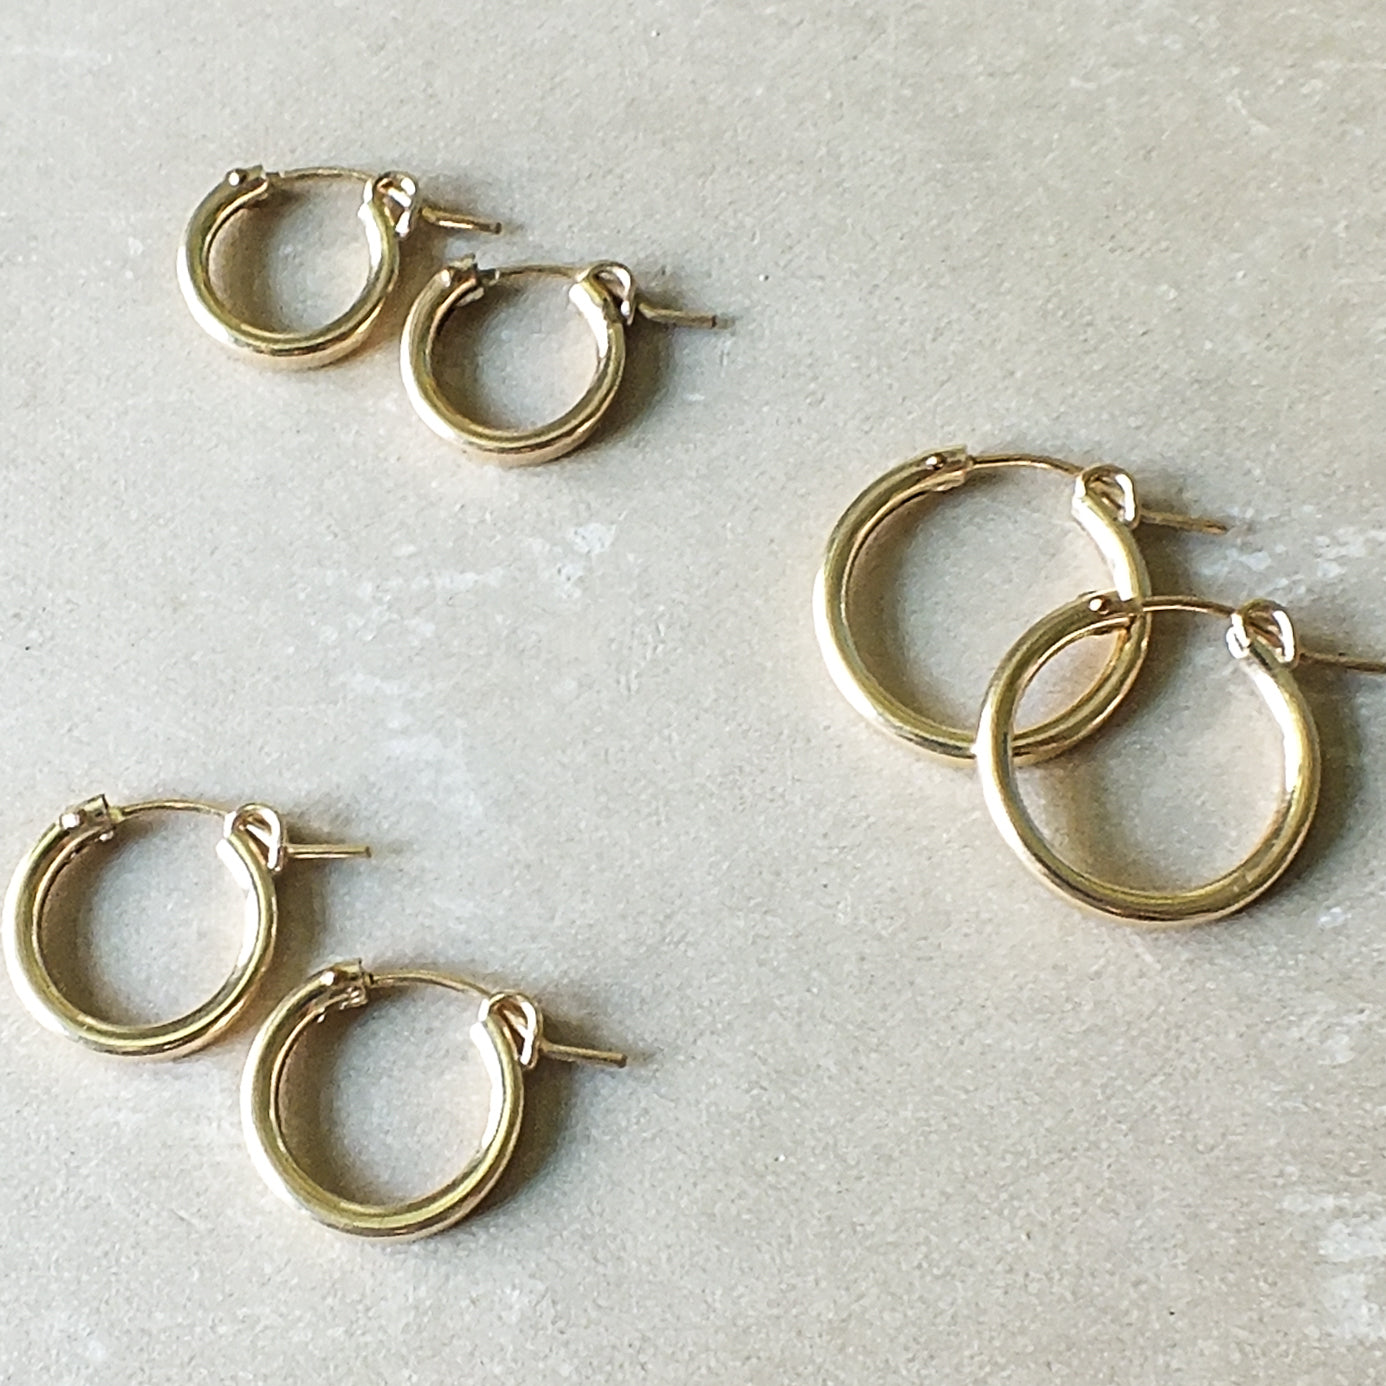 A collection of Becoming Jewelry&#39;s medium Everyday Hoop Earrings in gold filled on a gray surface.